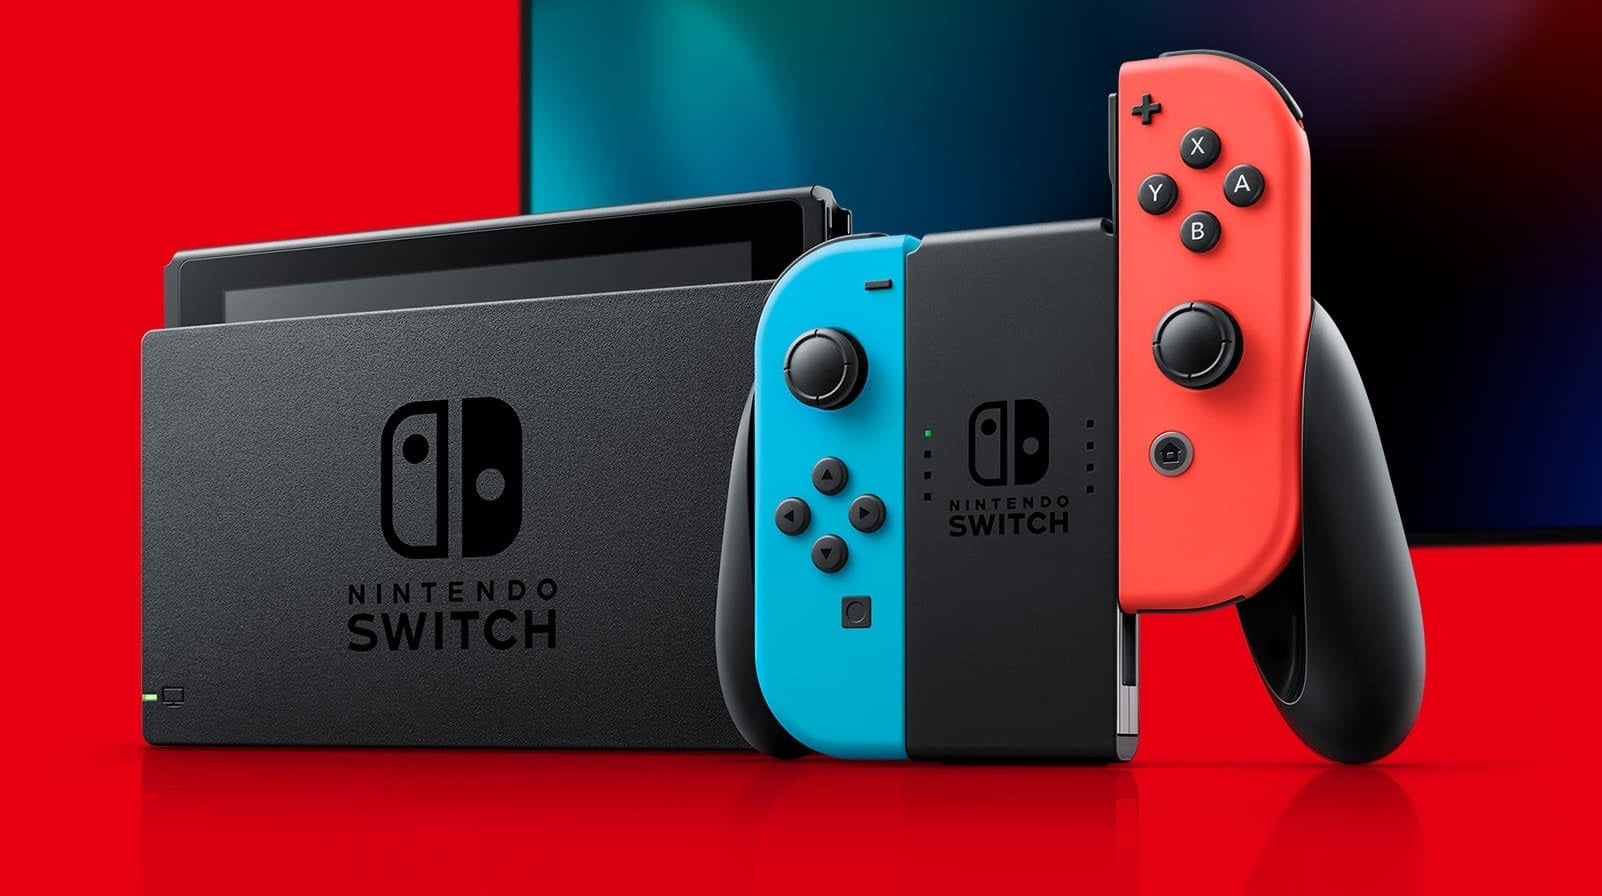 Image for Nintendo Switch and 3DS digital games will be available to purchase from Fanatical